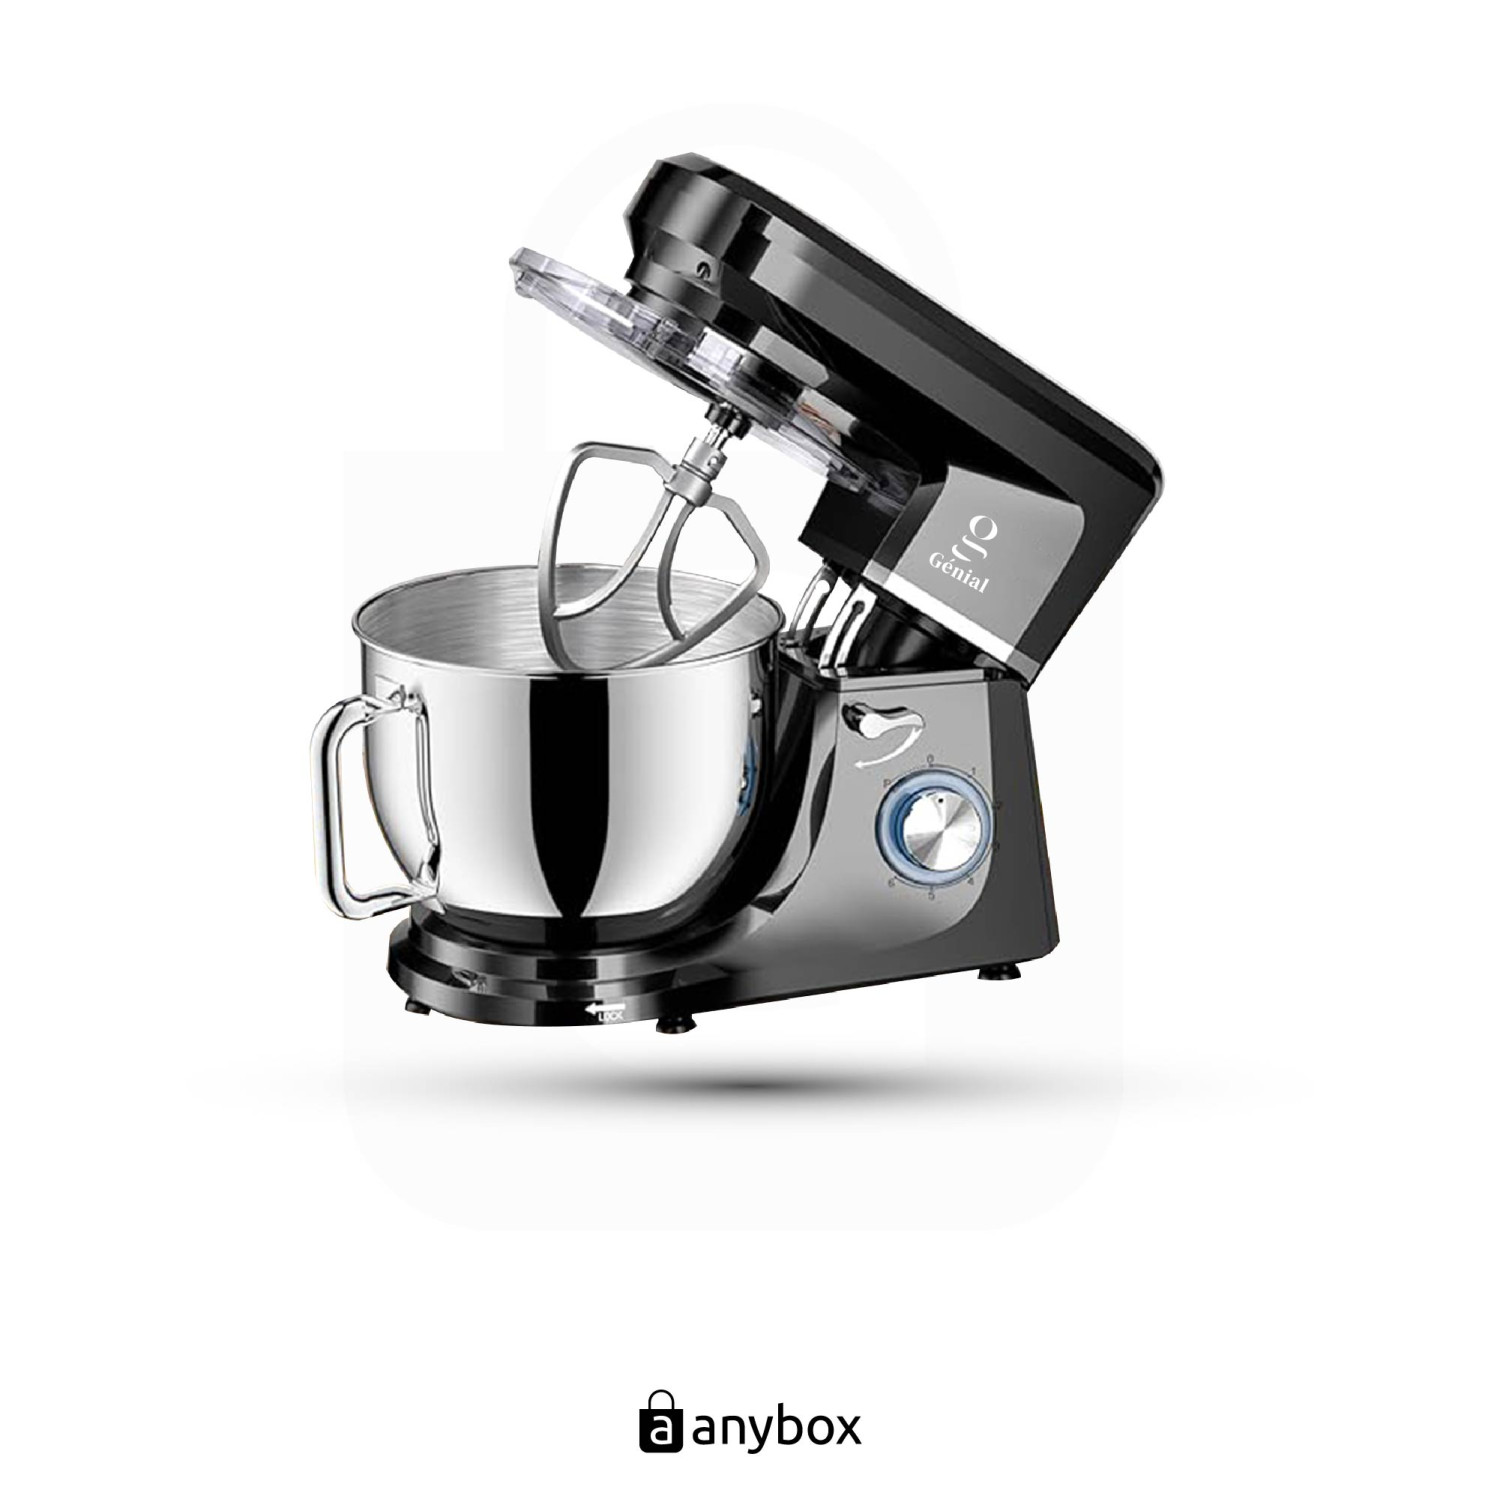 genial stand mixer 7L